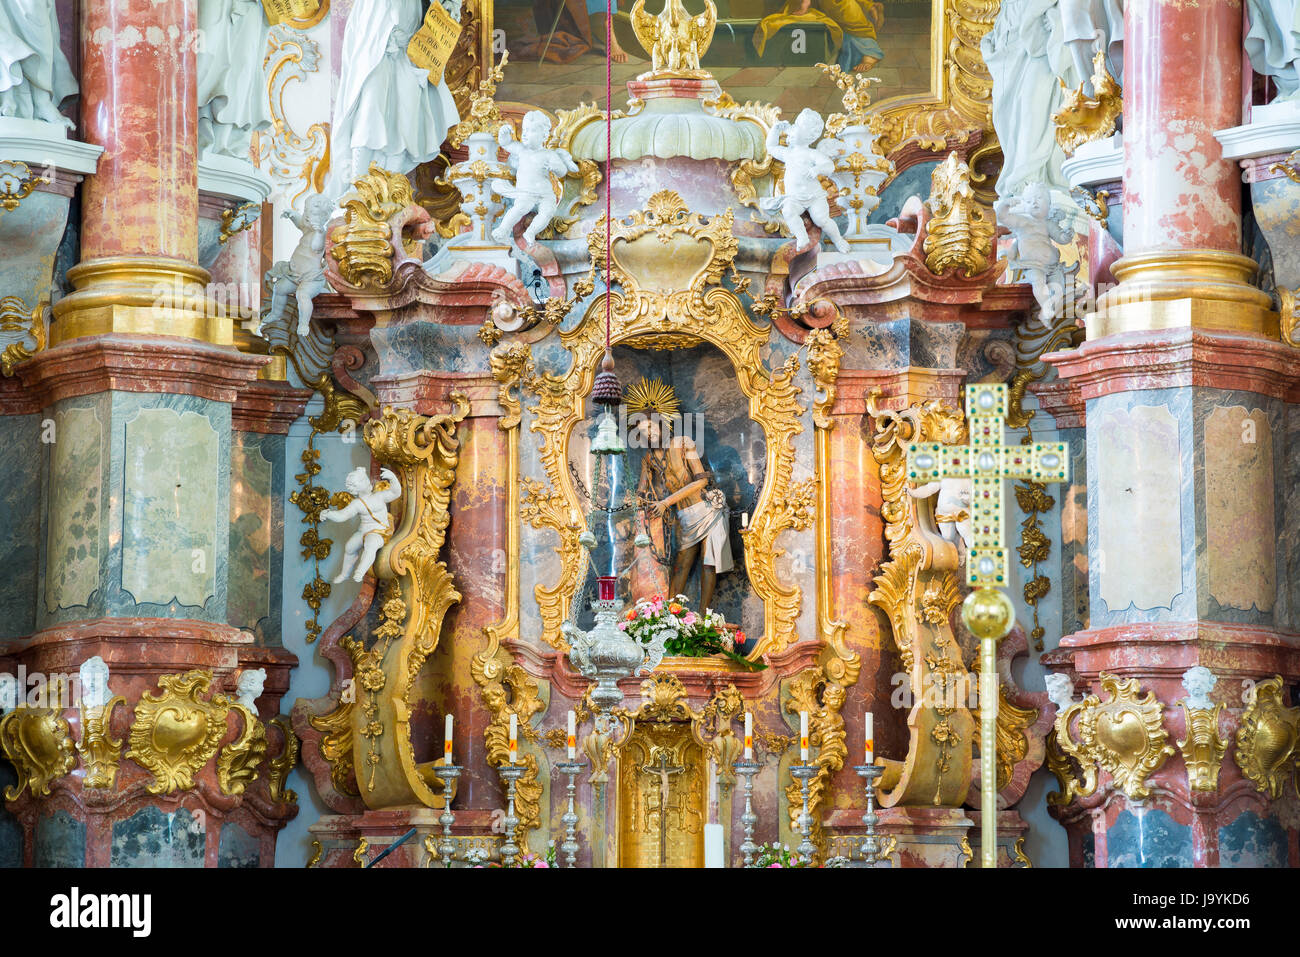 Steingaden, Germany - June 5, 2016: Altar with Jesus. Interior of Pilgrimage Church of Wies. It is an oval rococo church, designed in the late 1740s b Stock Photo